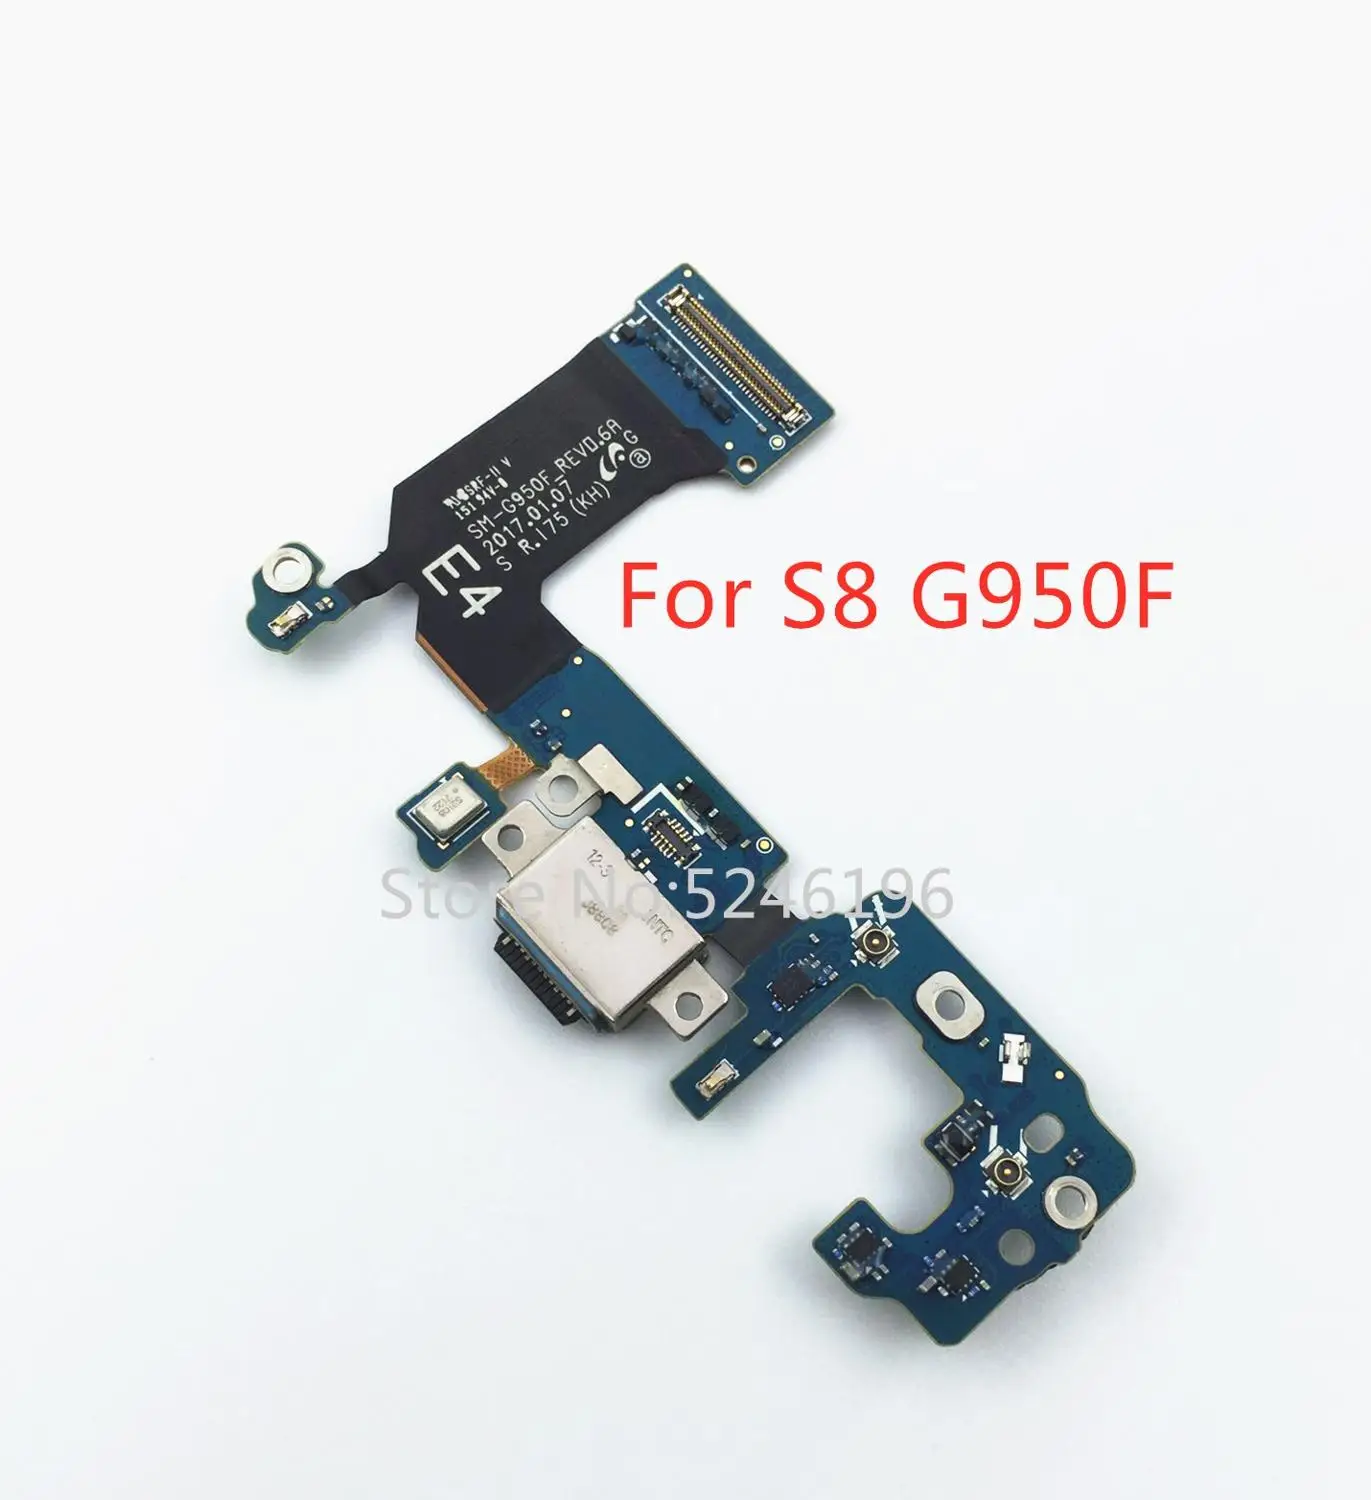 

1pcs Micro USB Charging Charger Dock Port Connector Flex Cable For Samsung Galaxy S8 G950F G950U G950N G9500 Original Replace